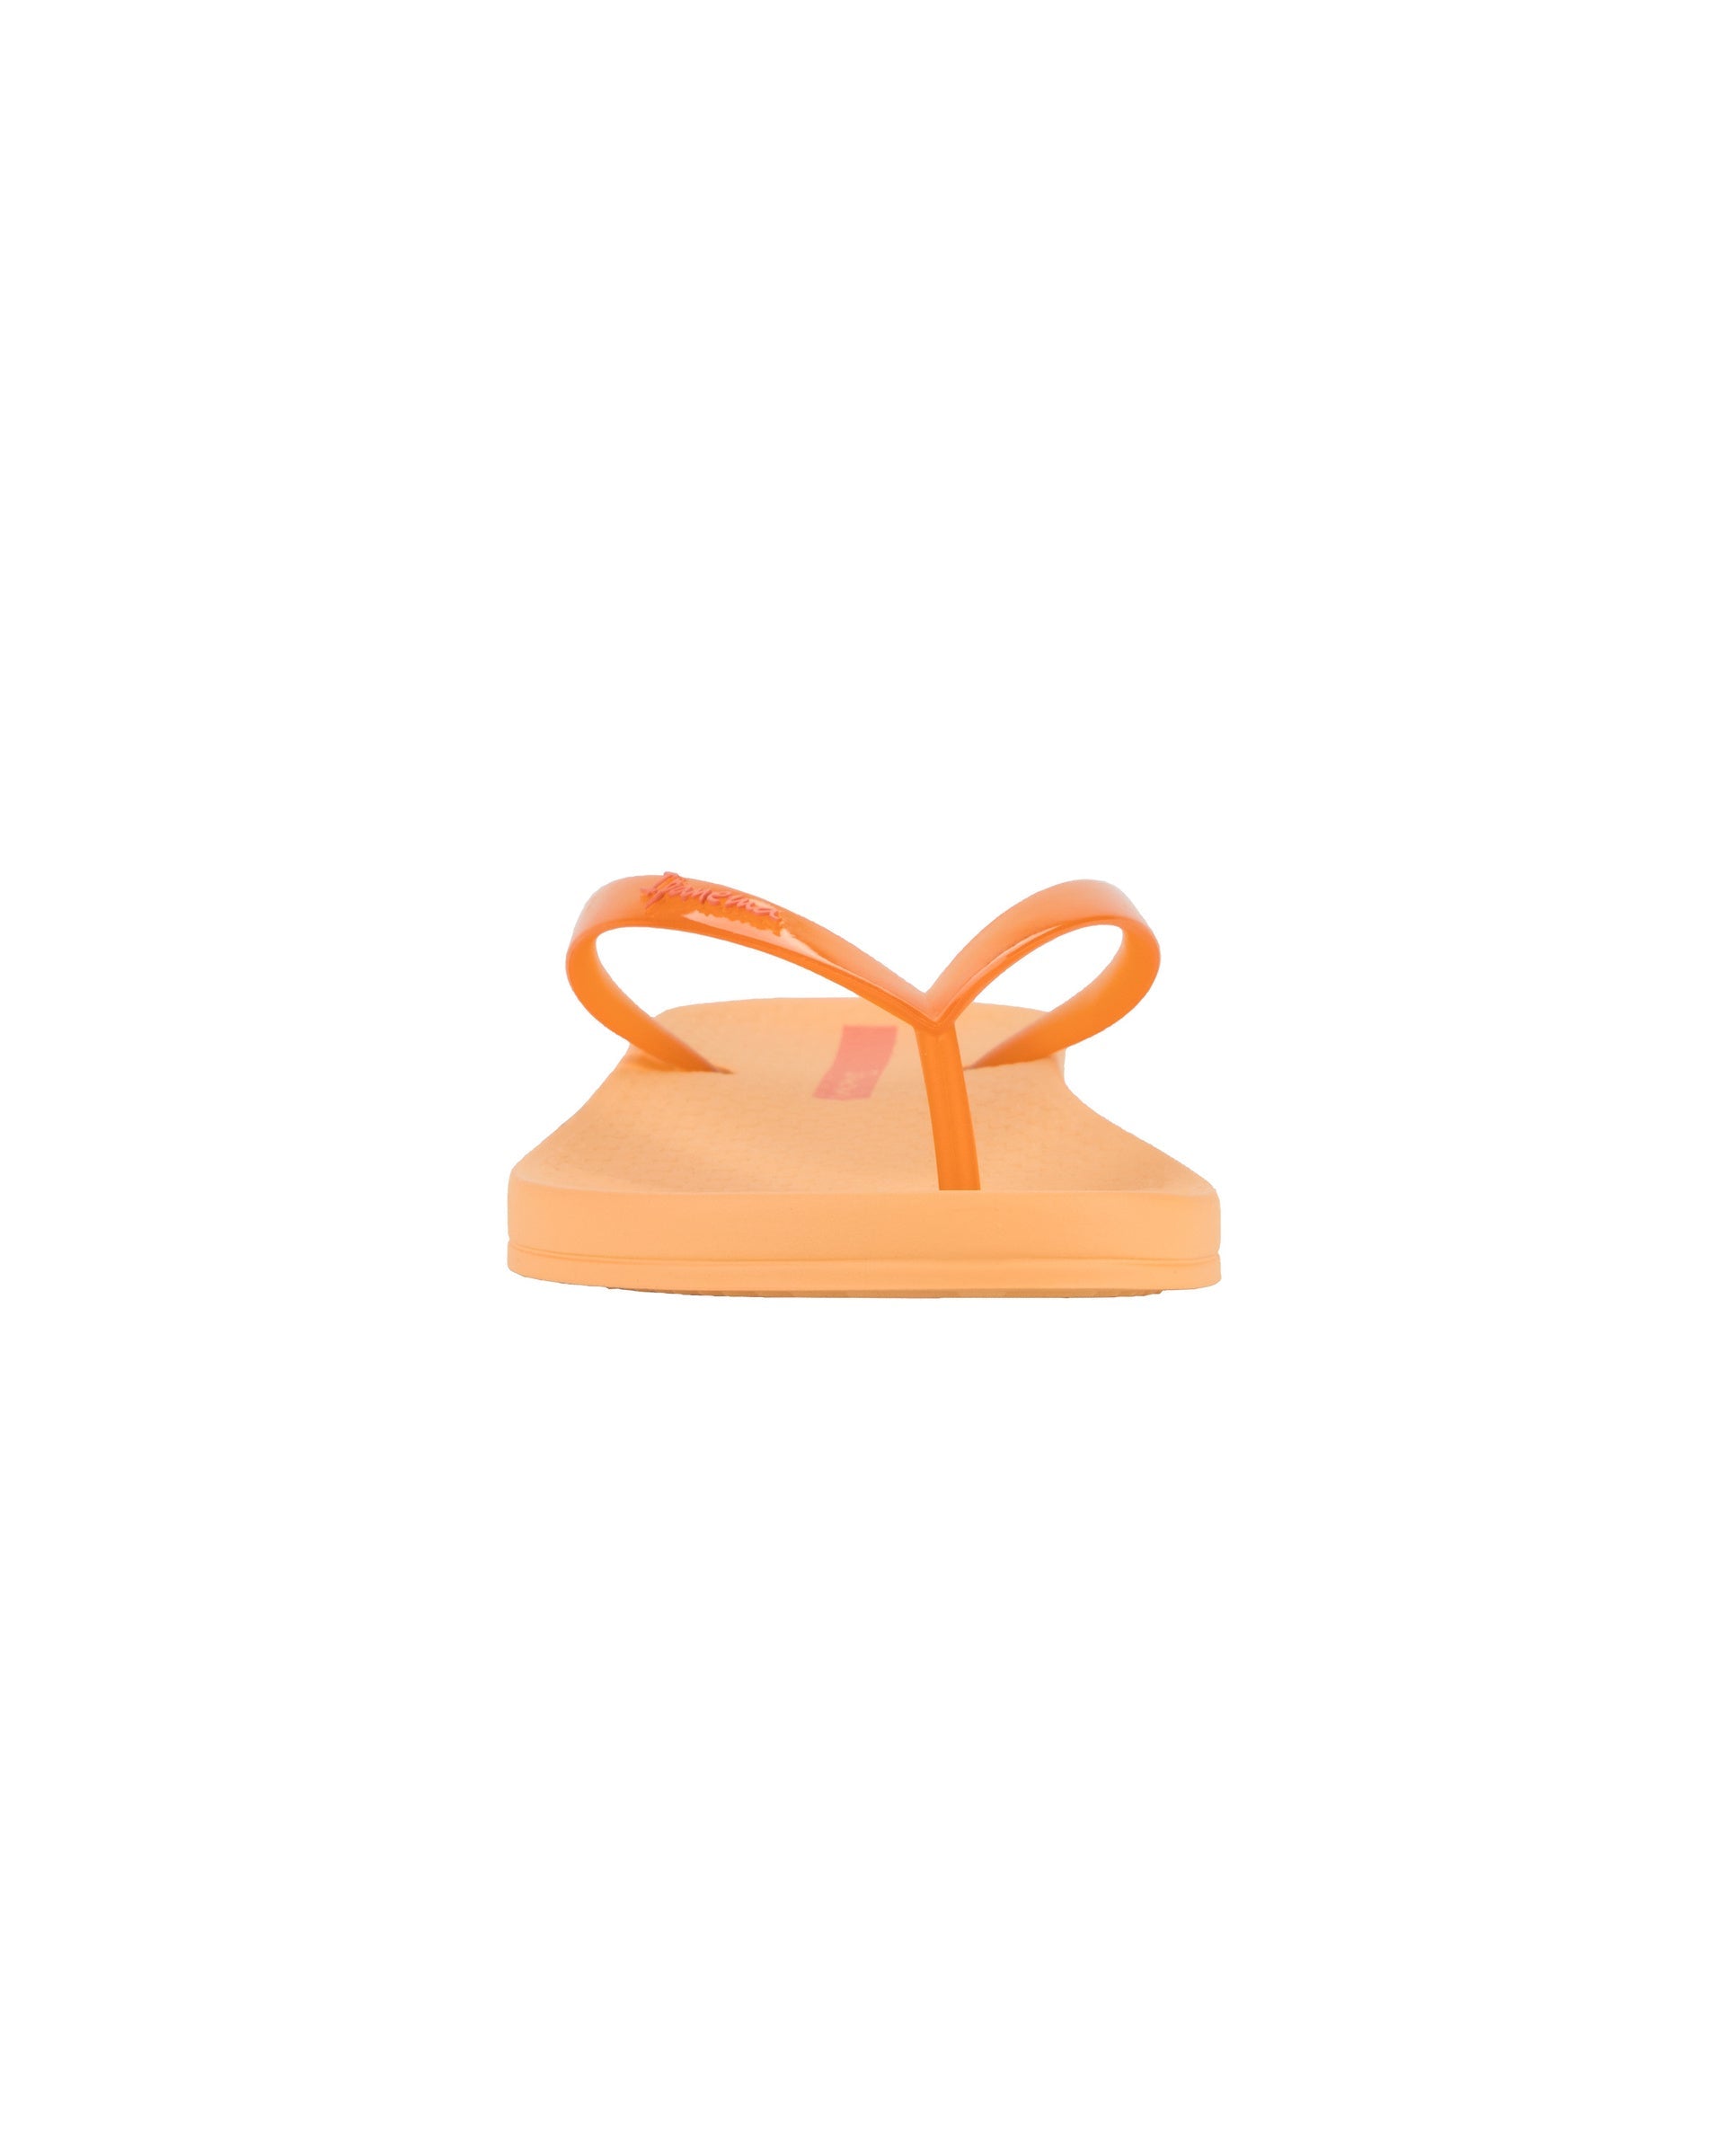 Front view of a orange Ipanema Ana Connect women's flip flop with a clear orange strap.